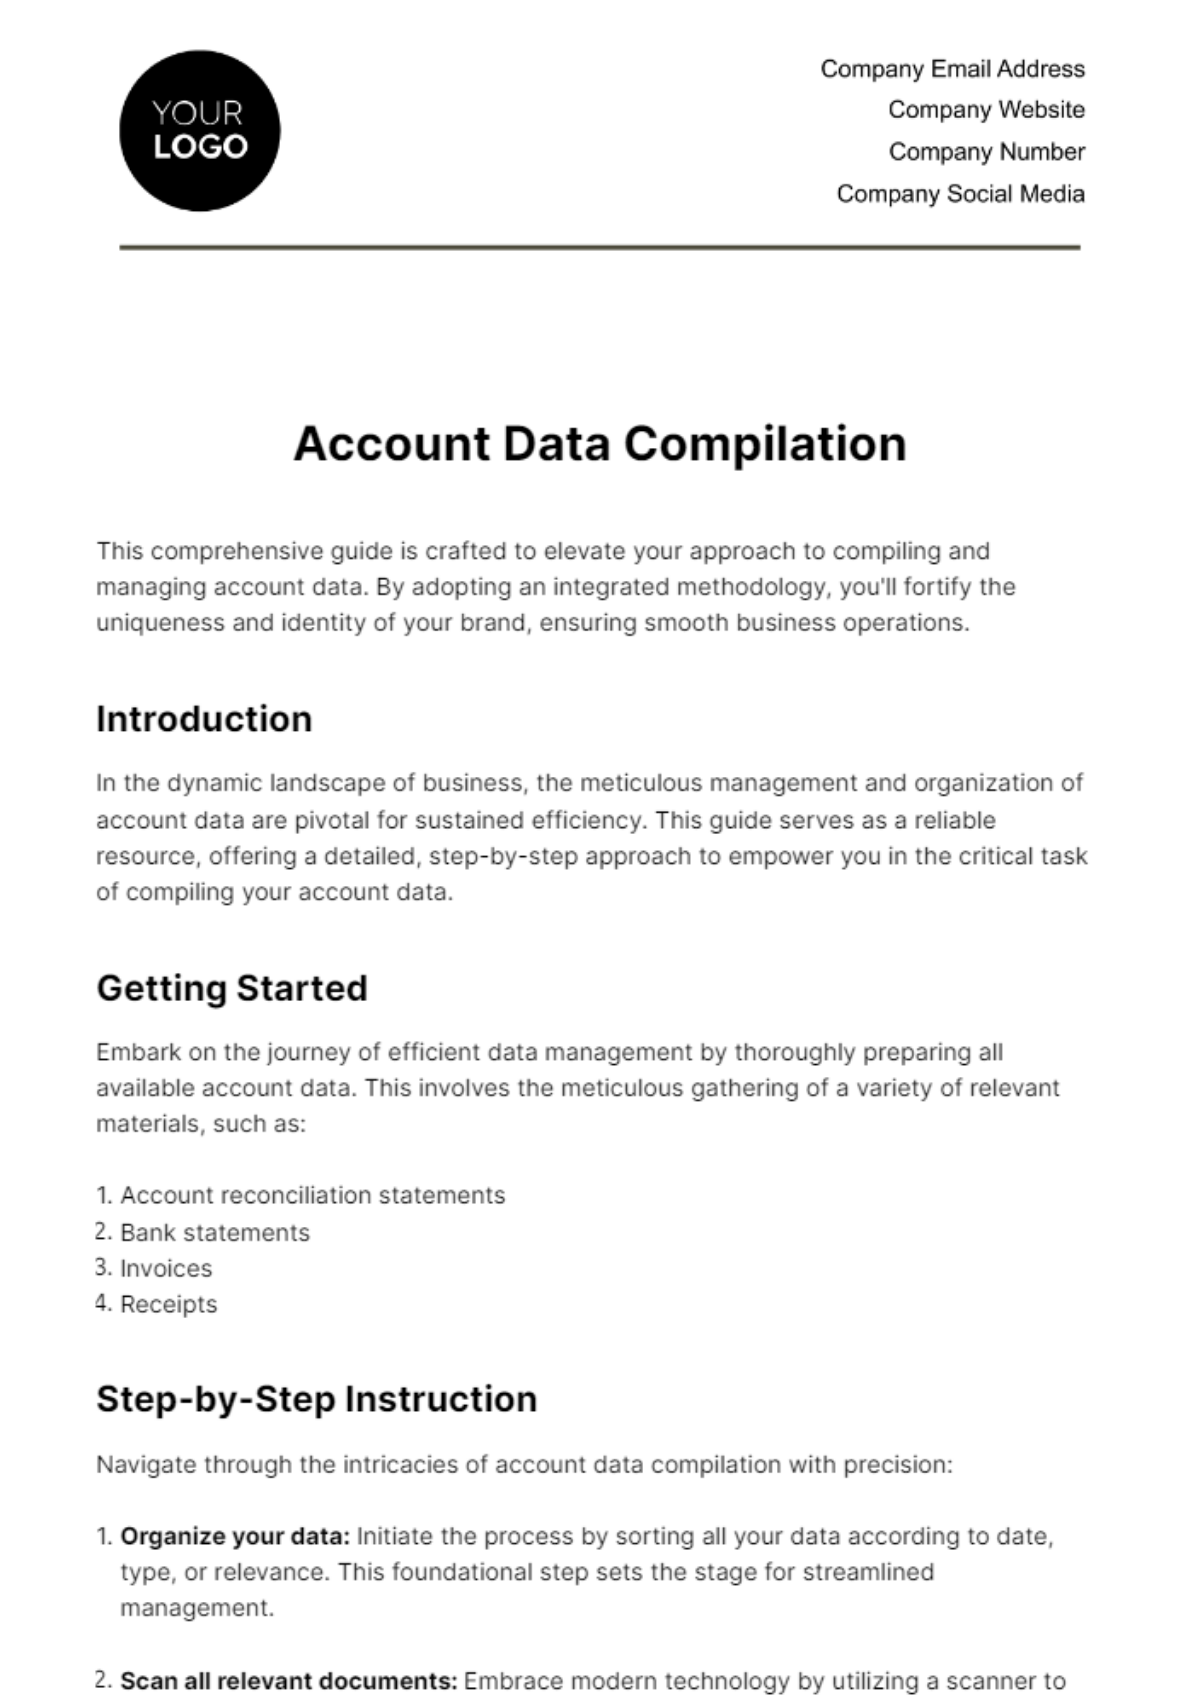 Account Data Compilation Template